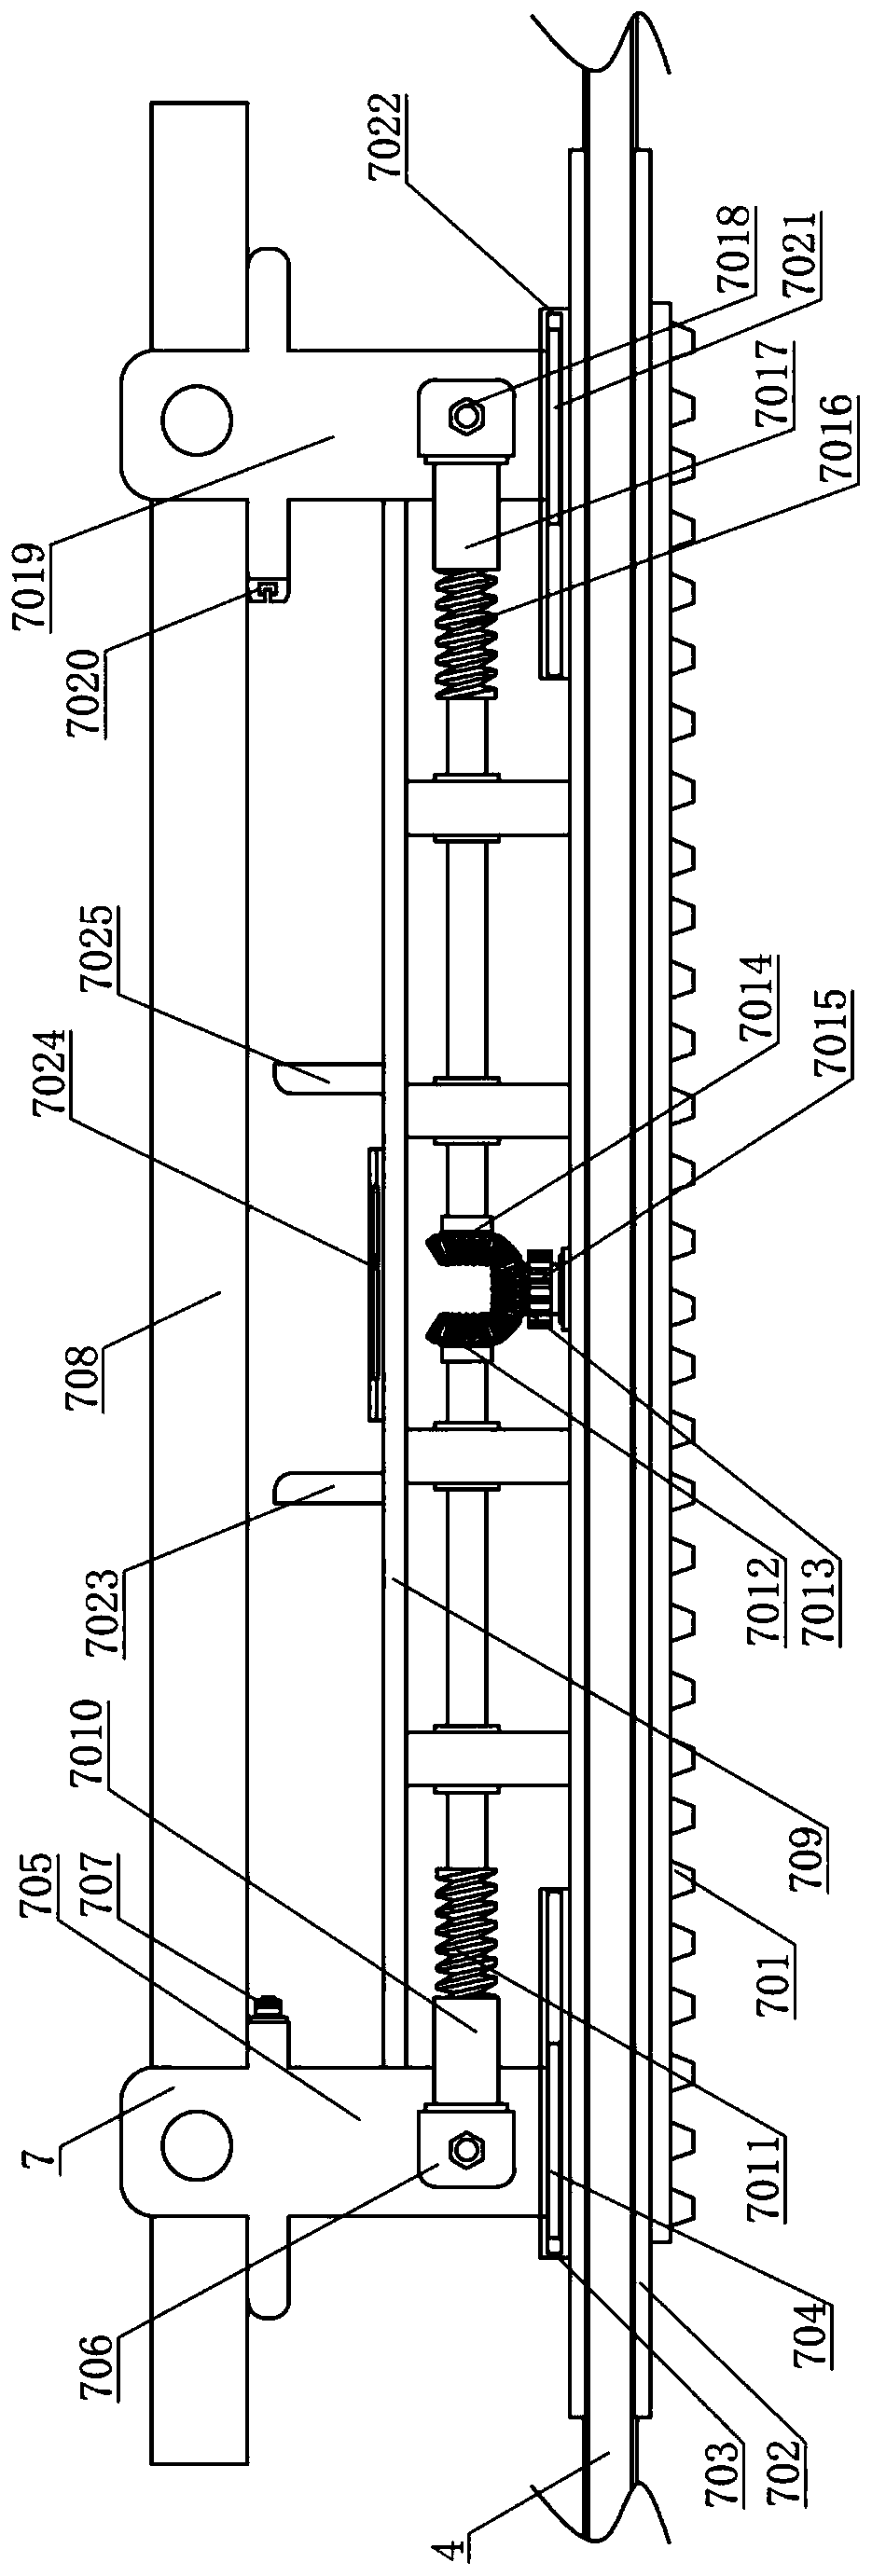 Thermal insulation board detection device